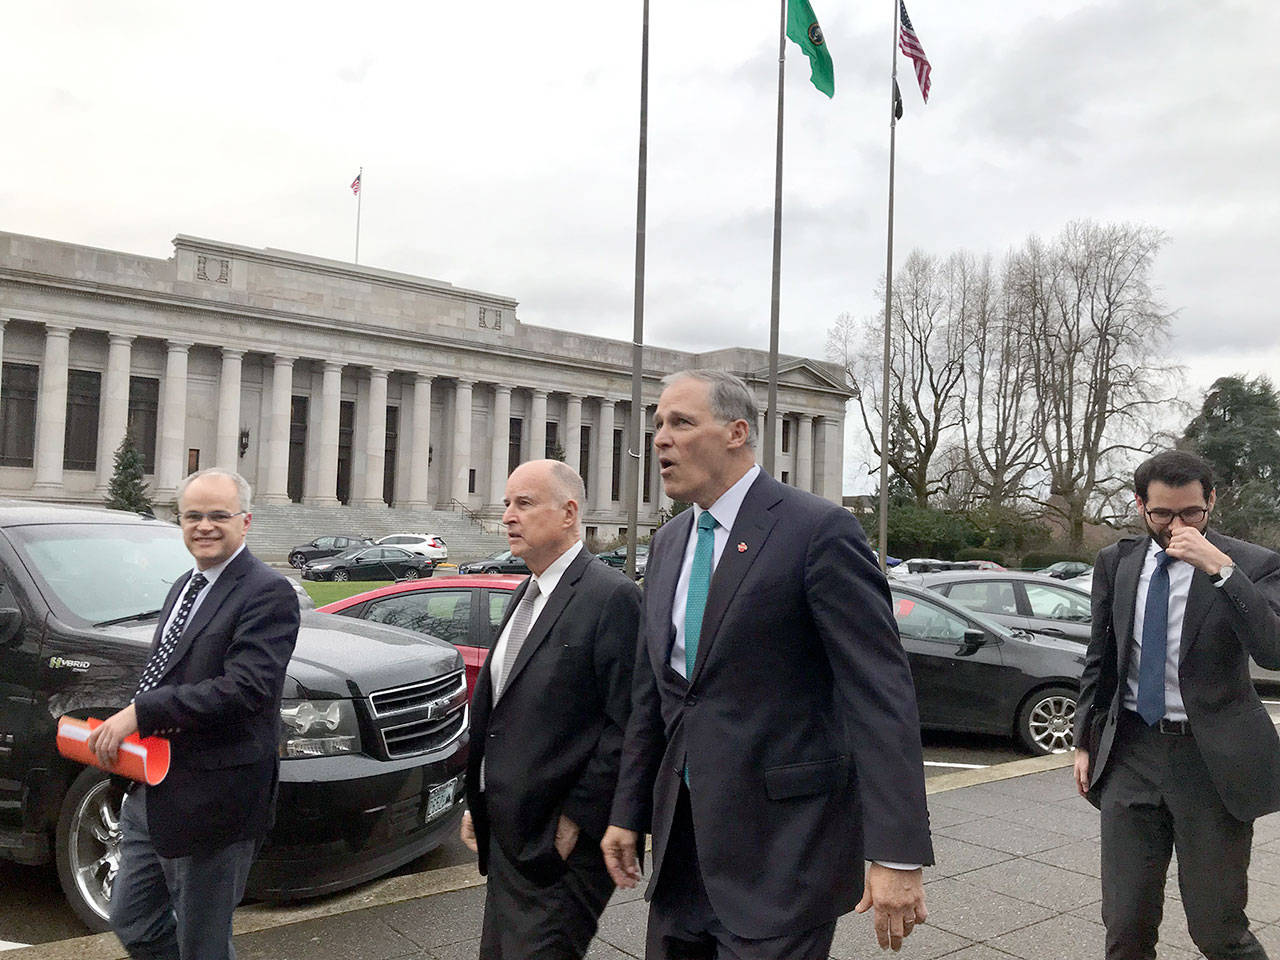 Former California governor Jerry Brown, middle left, and Gov. Jay Inslee, middle right, leave the Legislative Building in Olympia last Thursday. (Emma Scher/WNPA Olympia News Bureau)